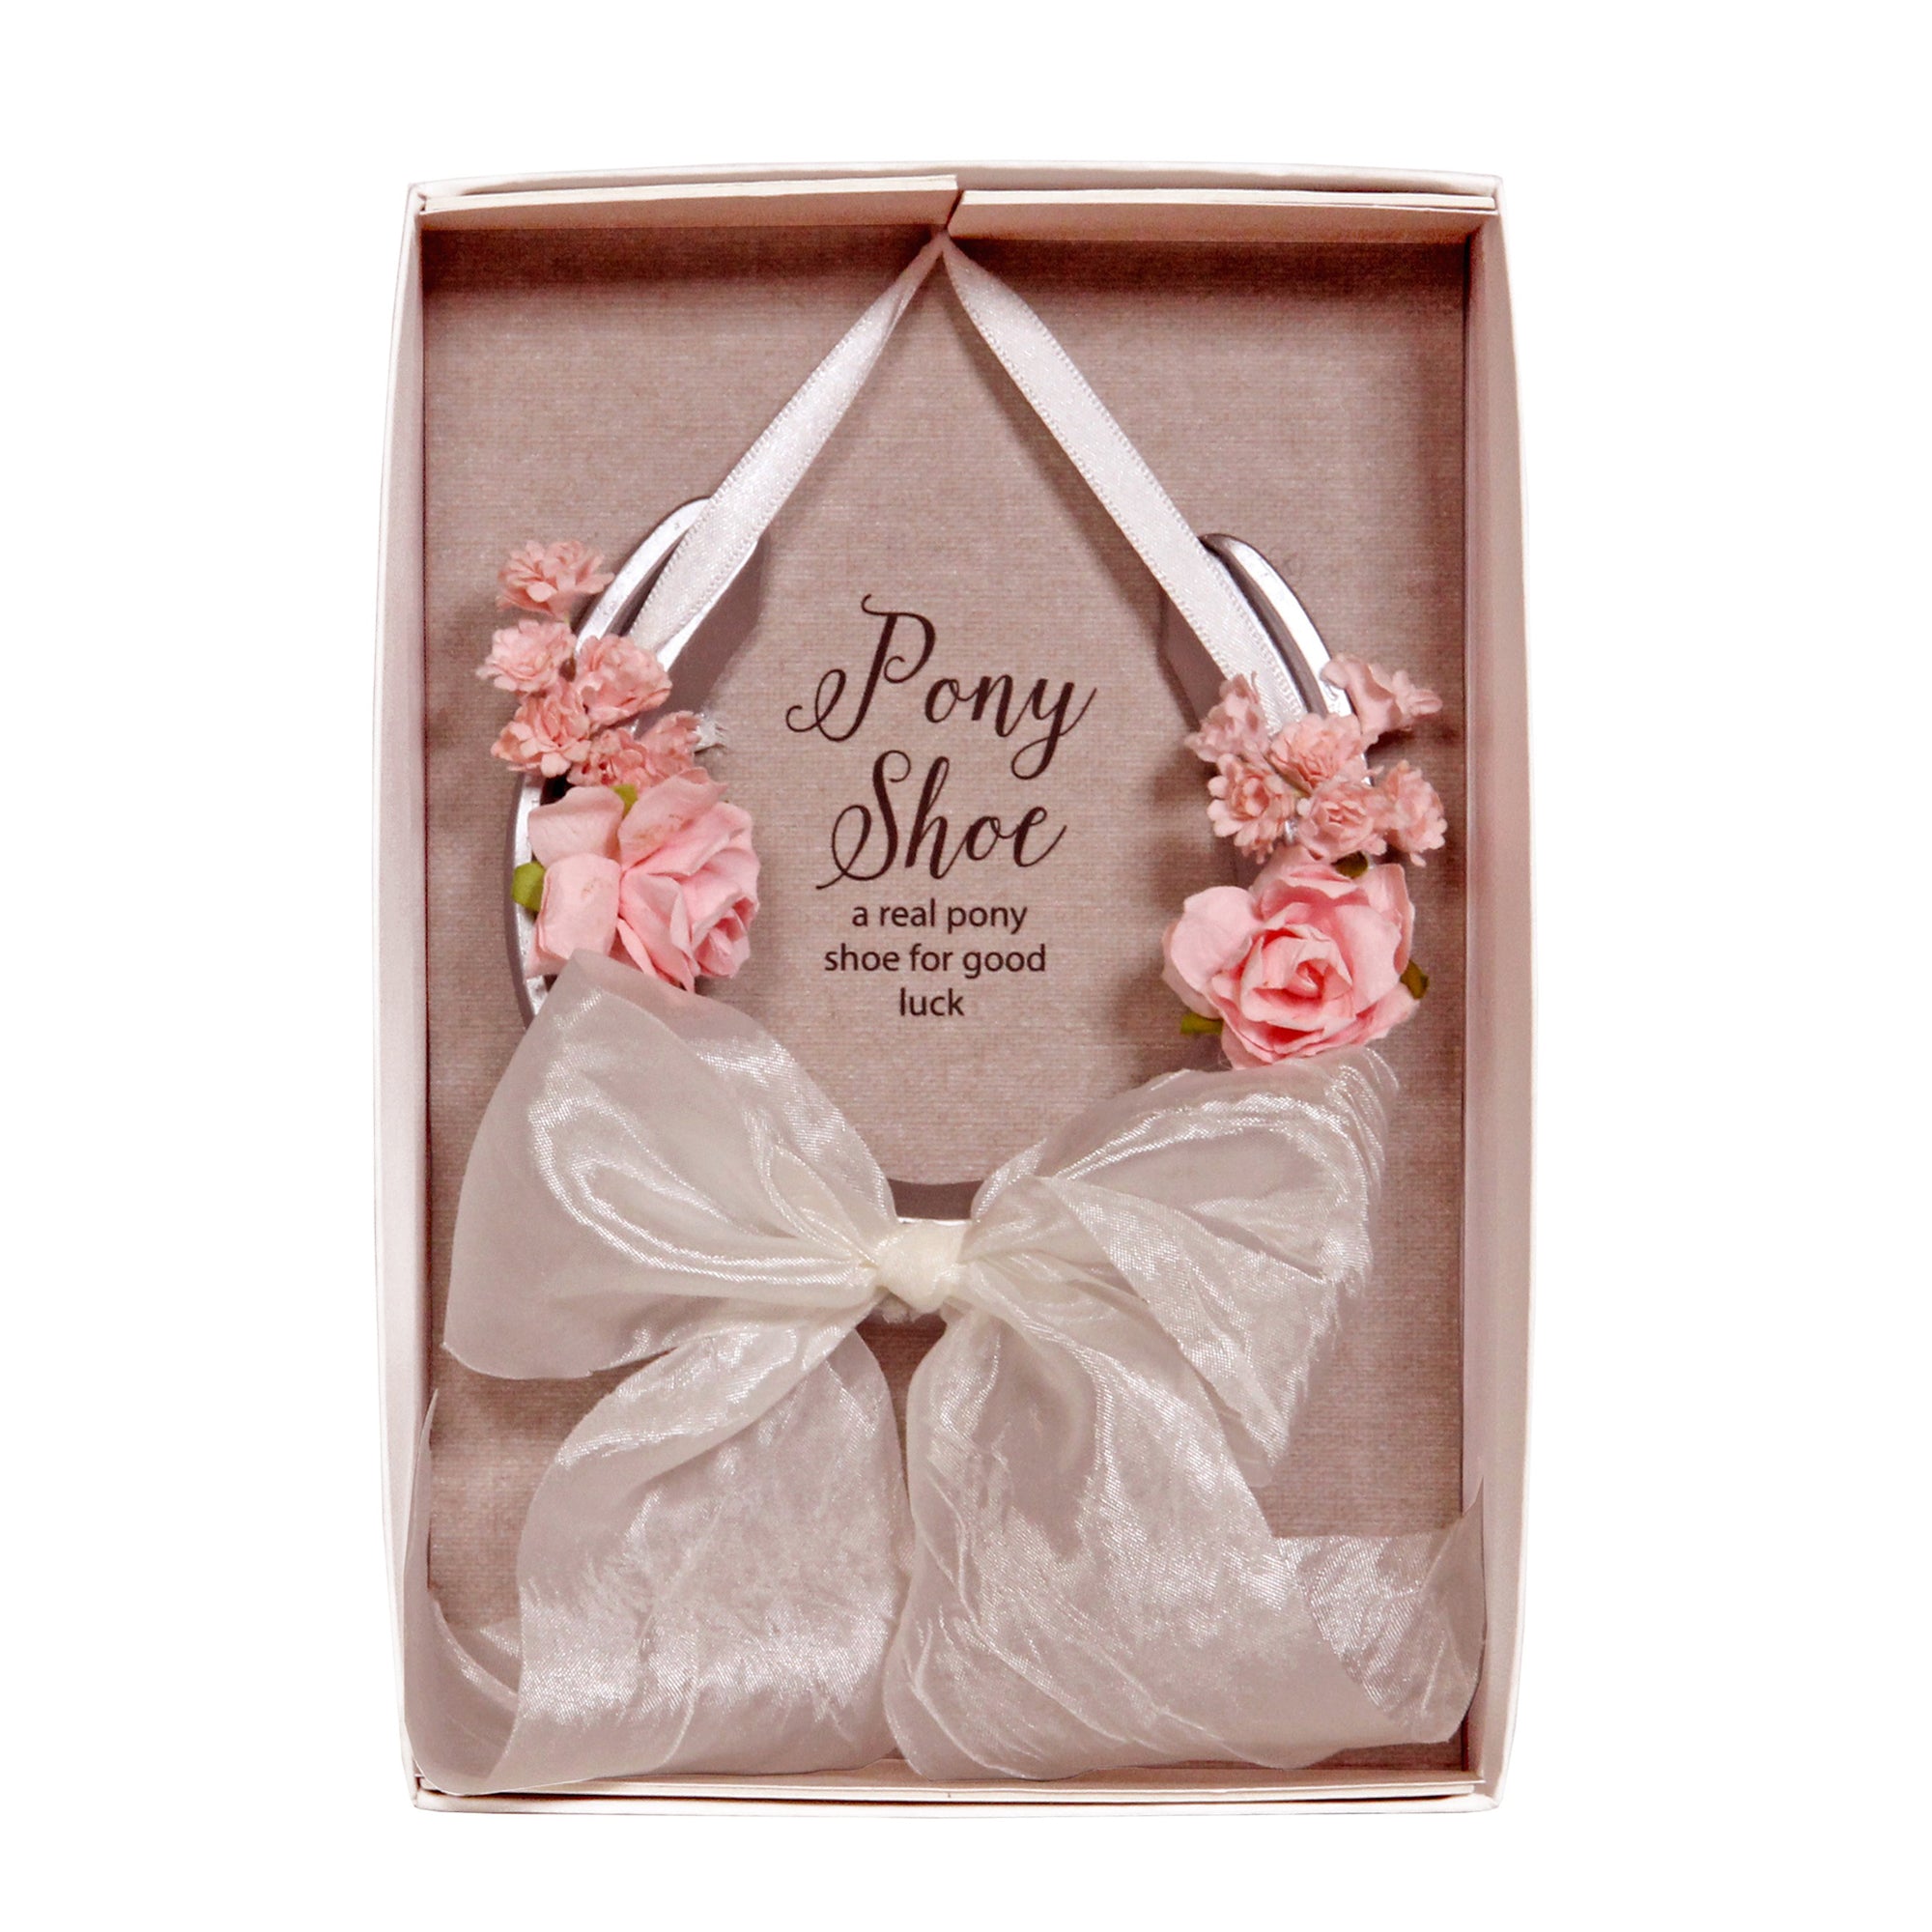 Real Pony Horseshoe with Pink Flowers, Personalised Gift